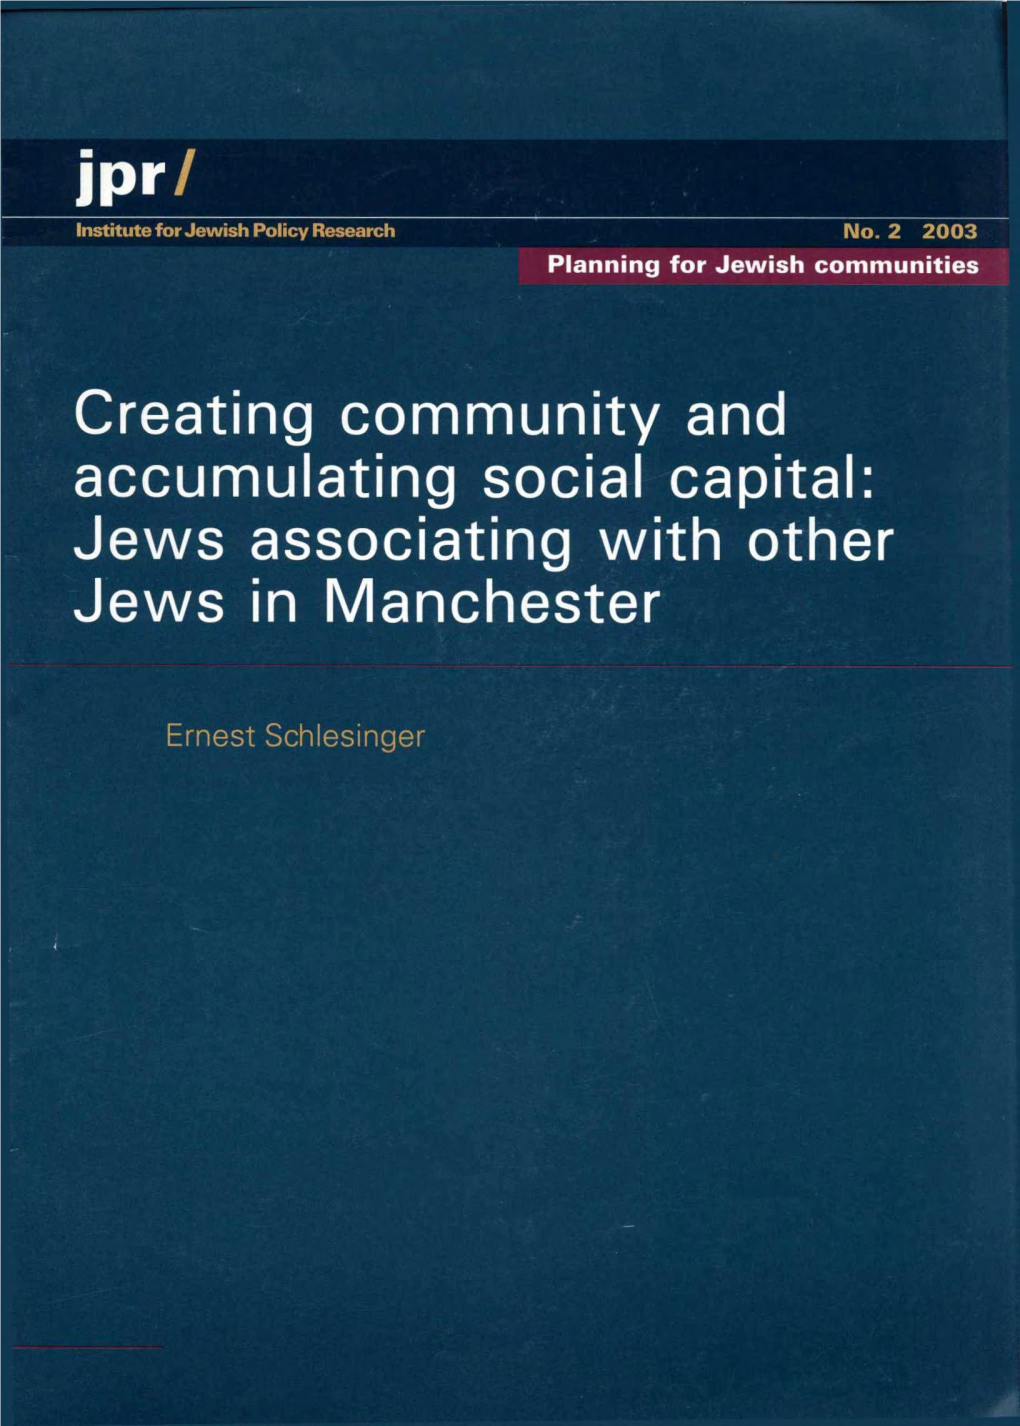 Creating Community and Accumulating Social Capital: Jews Associating with Other Jews in Manchester